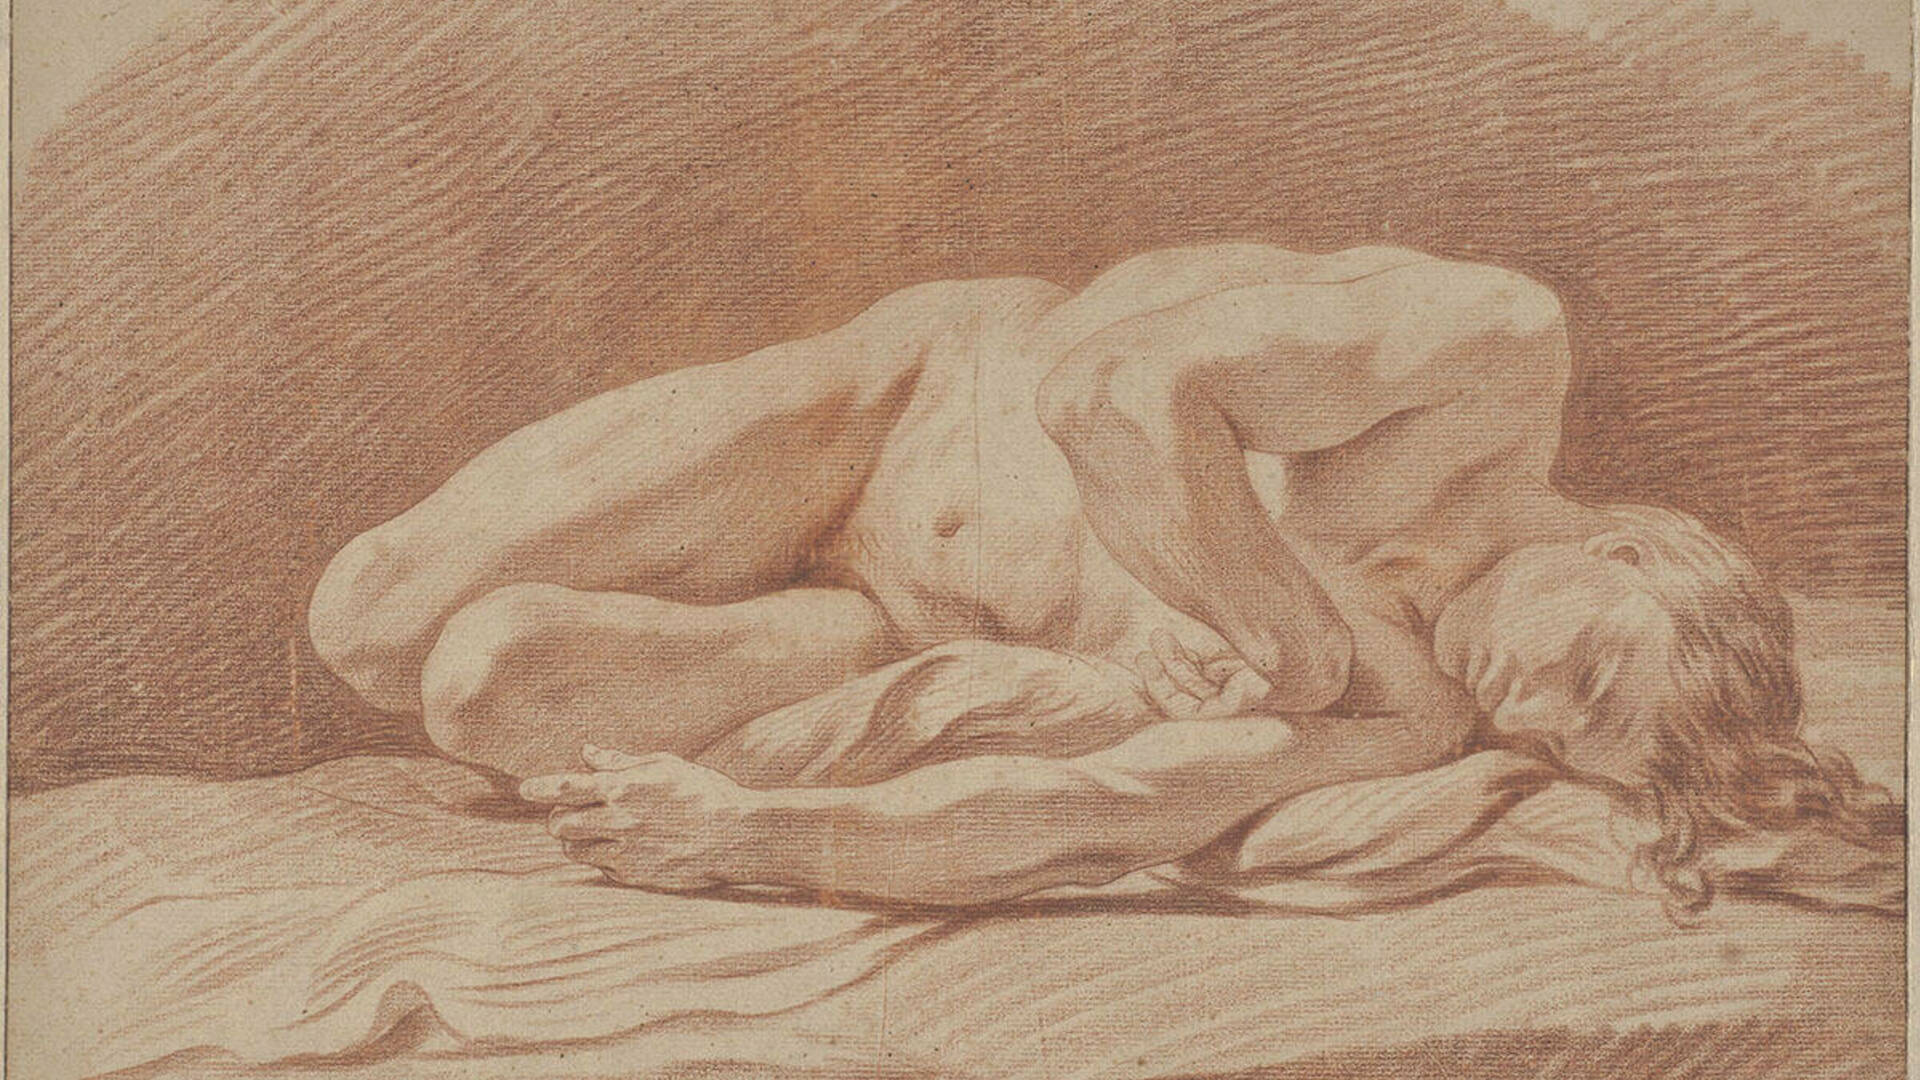 Jean Jacques Lagrenée II (French, 1739–1821), Study of a Male Nude, red chalk on laid paper. Purchased with funds provided by Mr. and Mrs. D'Arcy Chisholm, 1985.003.002